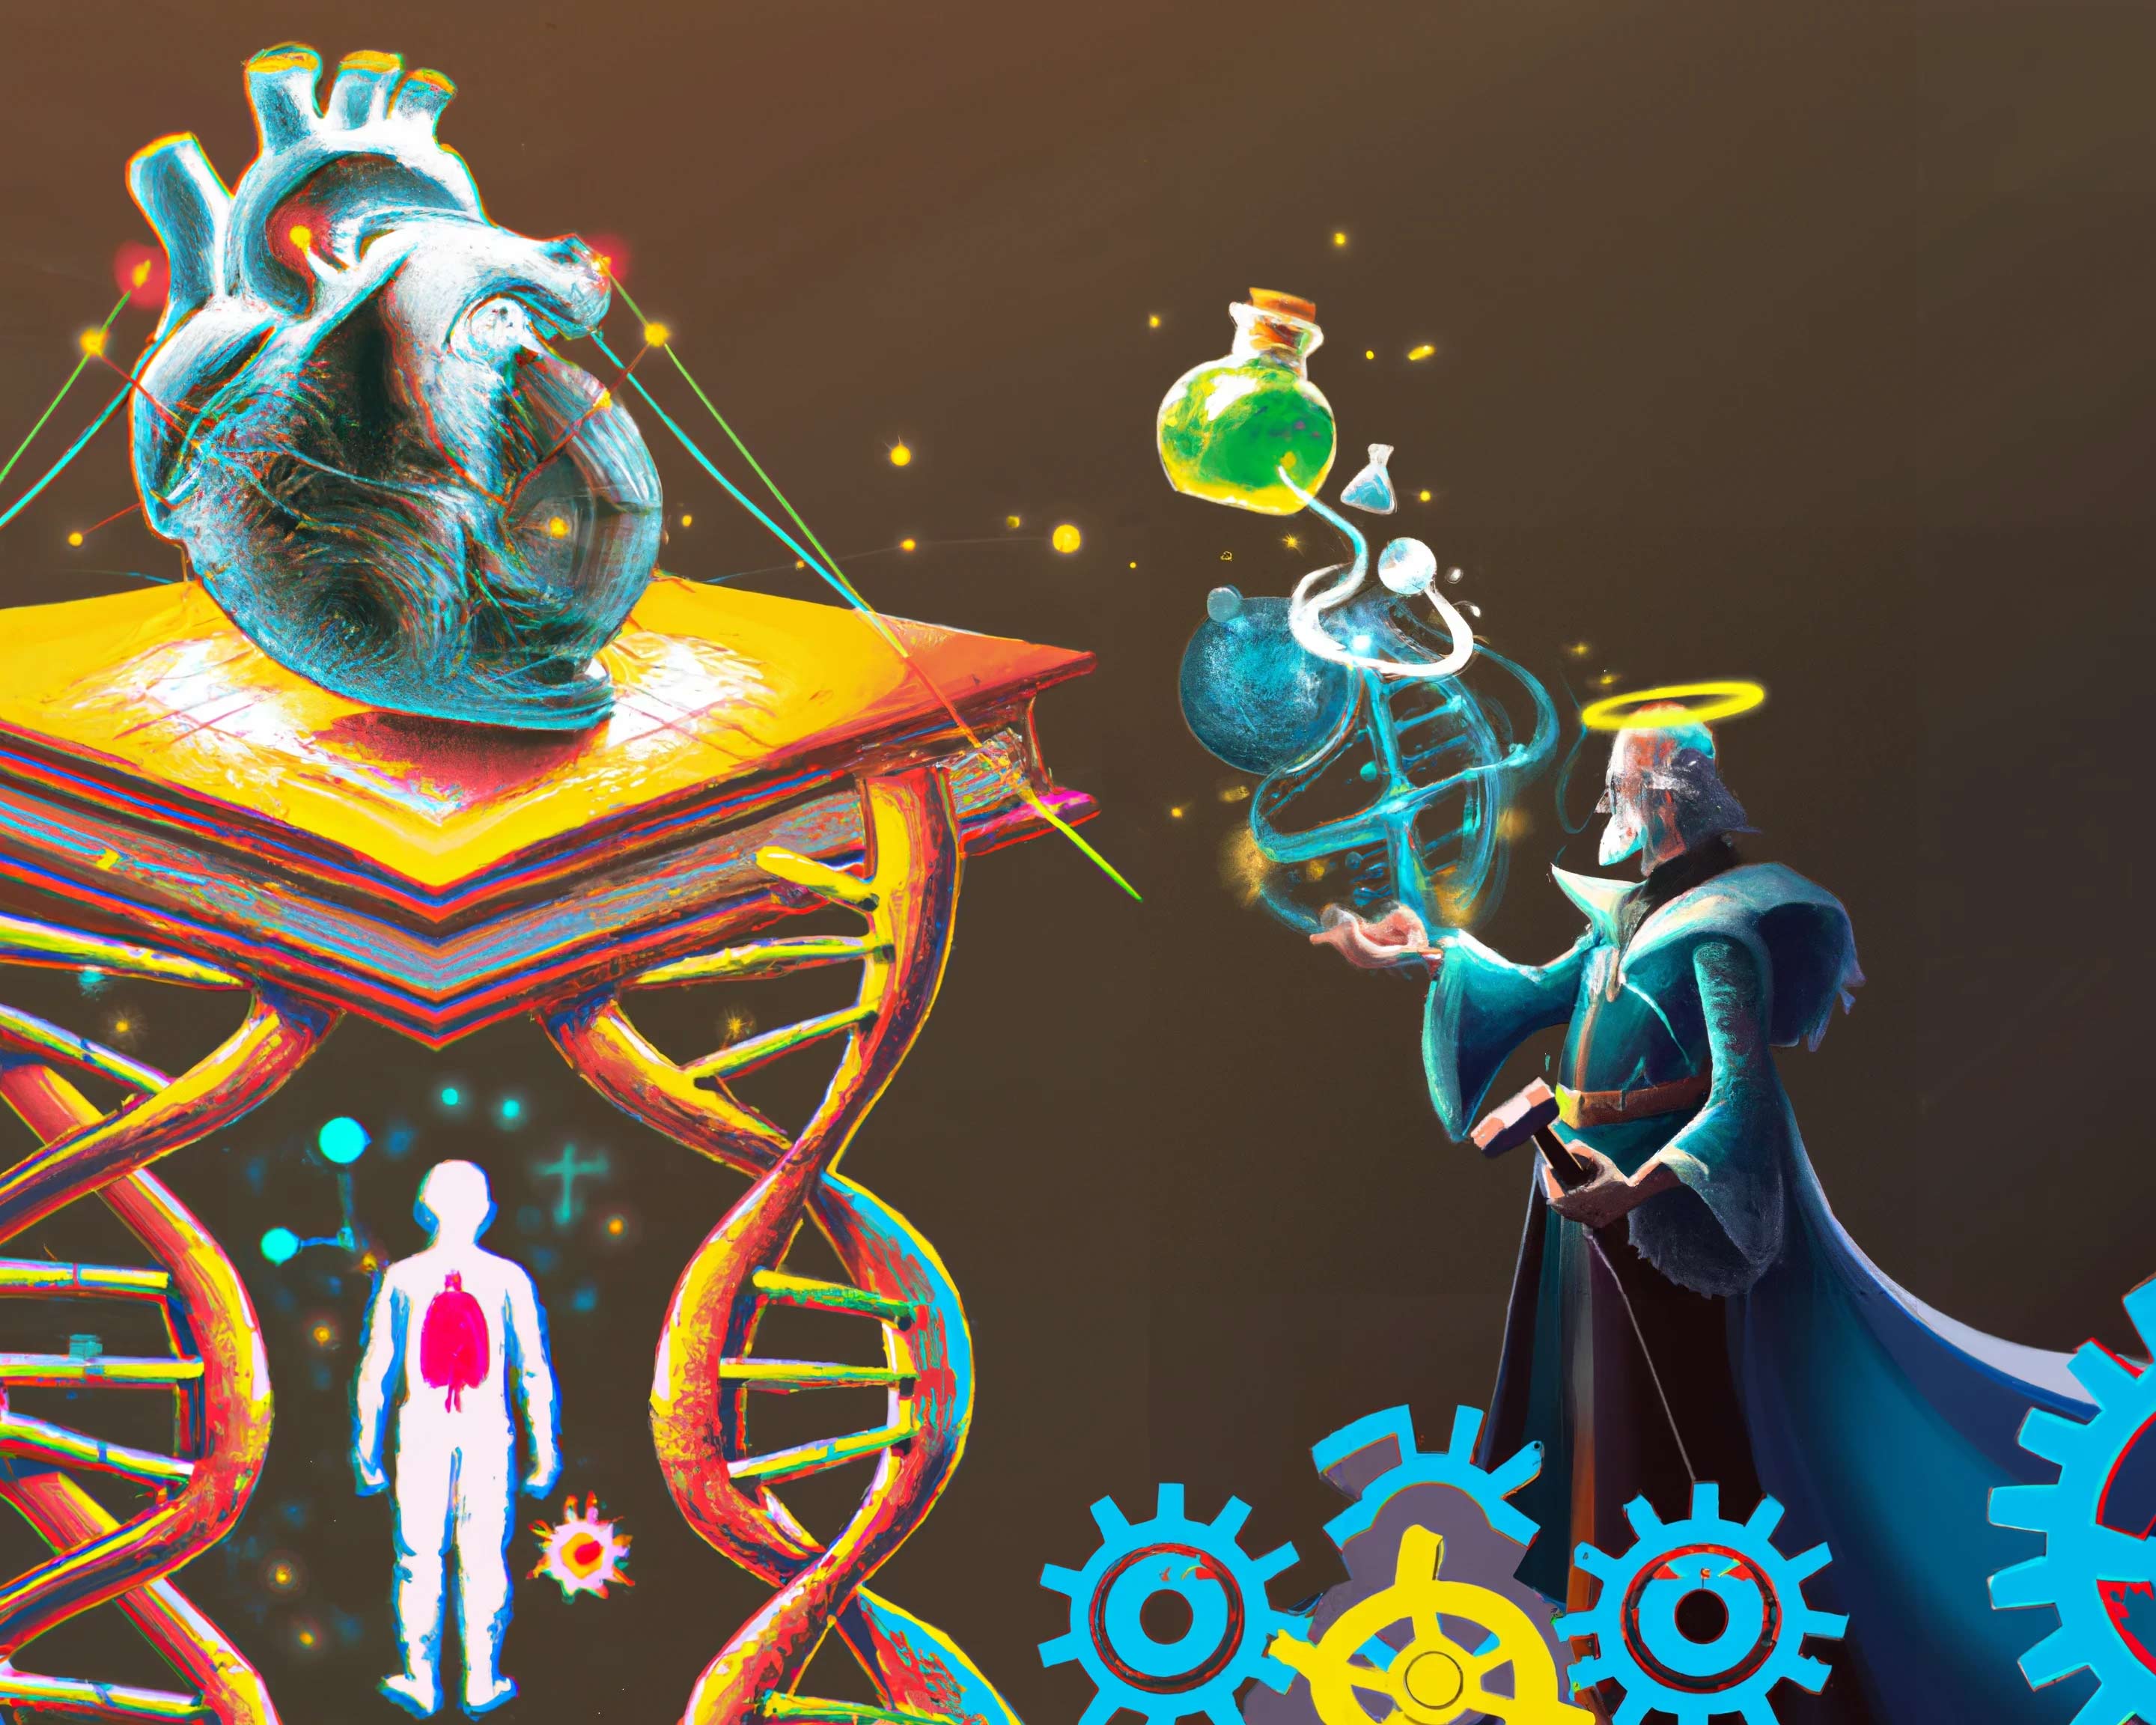 A digitally drawn image of large DNA strands holding a book with a heart on it in front of an alchemist.